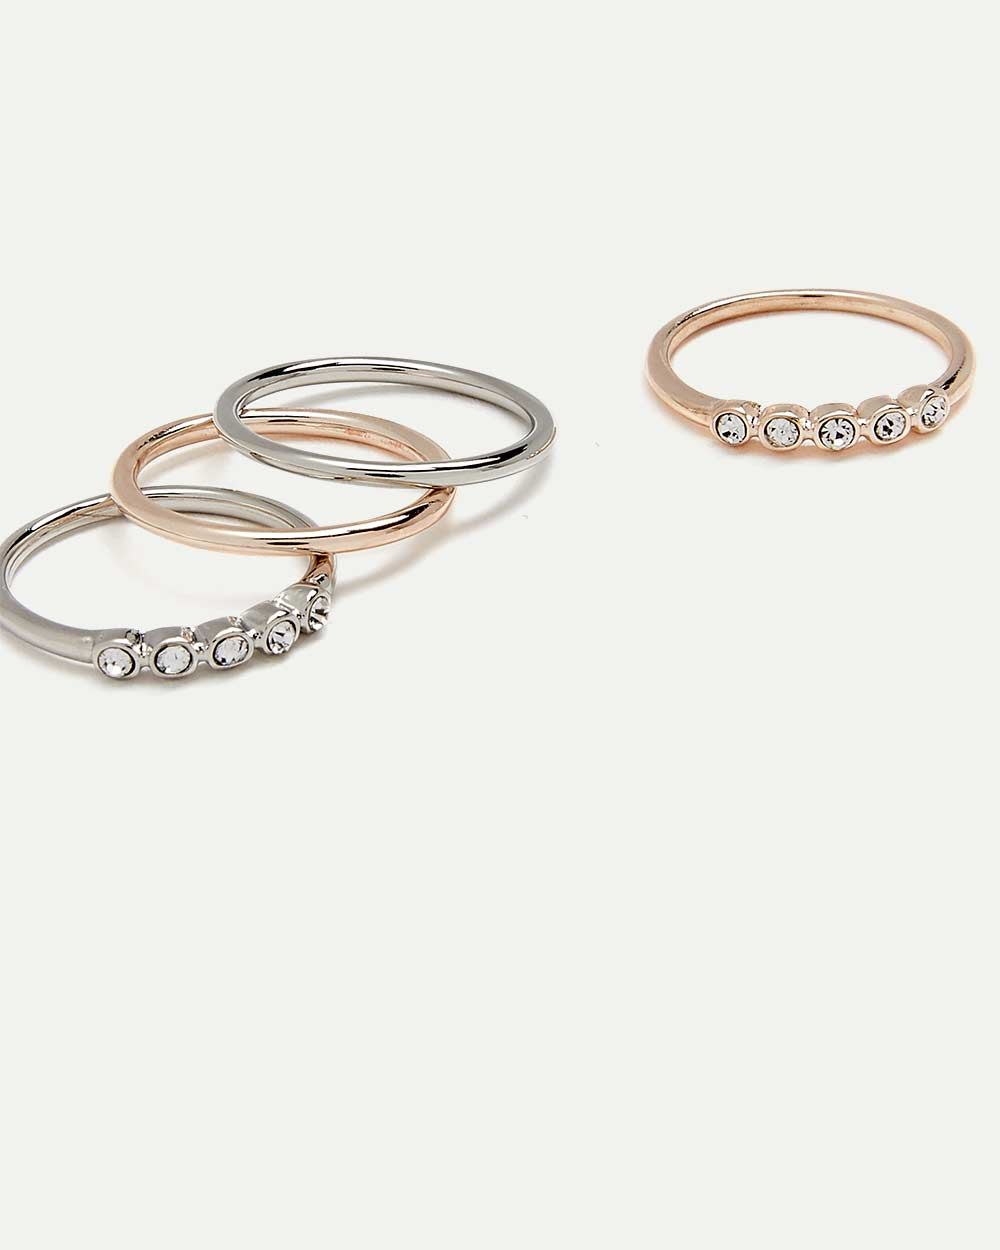 4-Pack Thin Rings